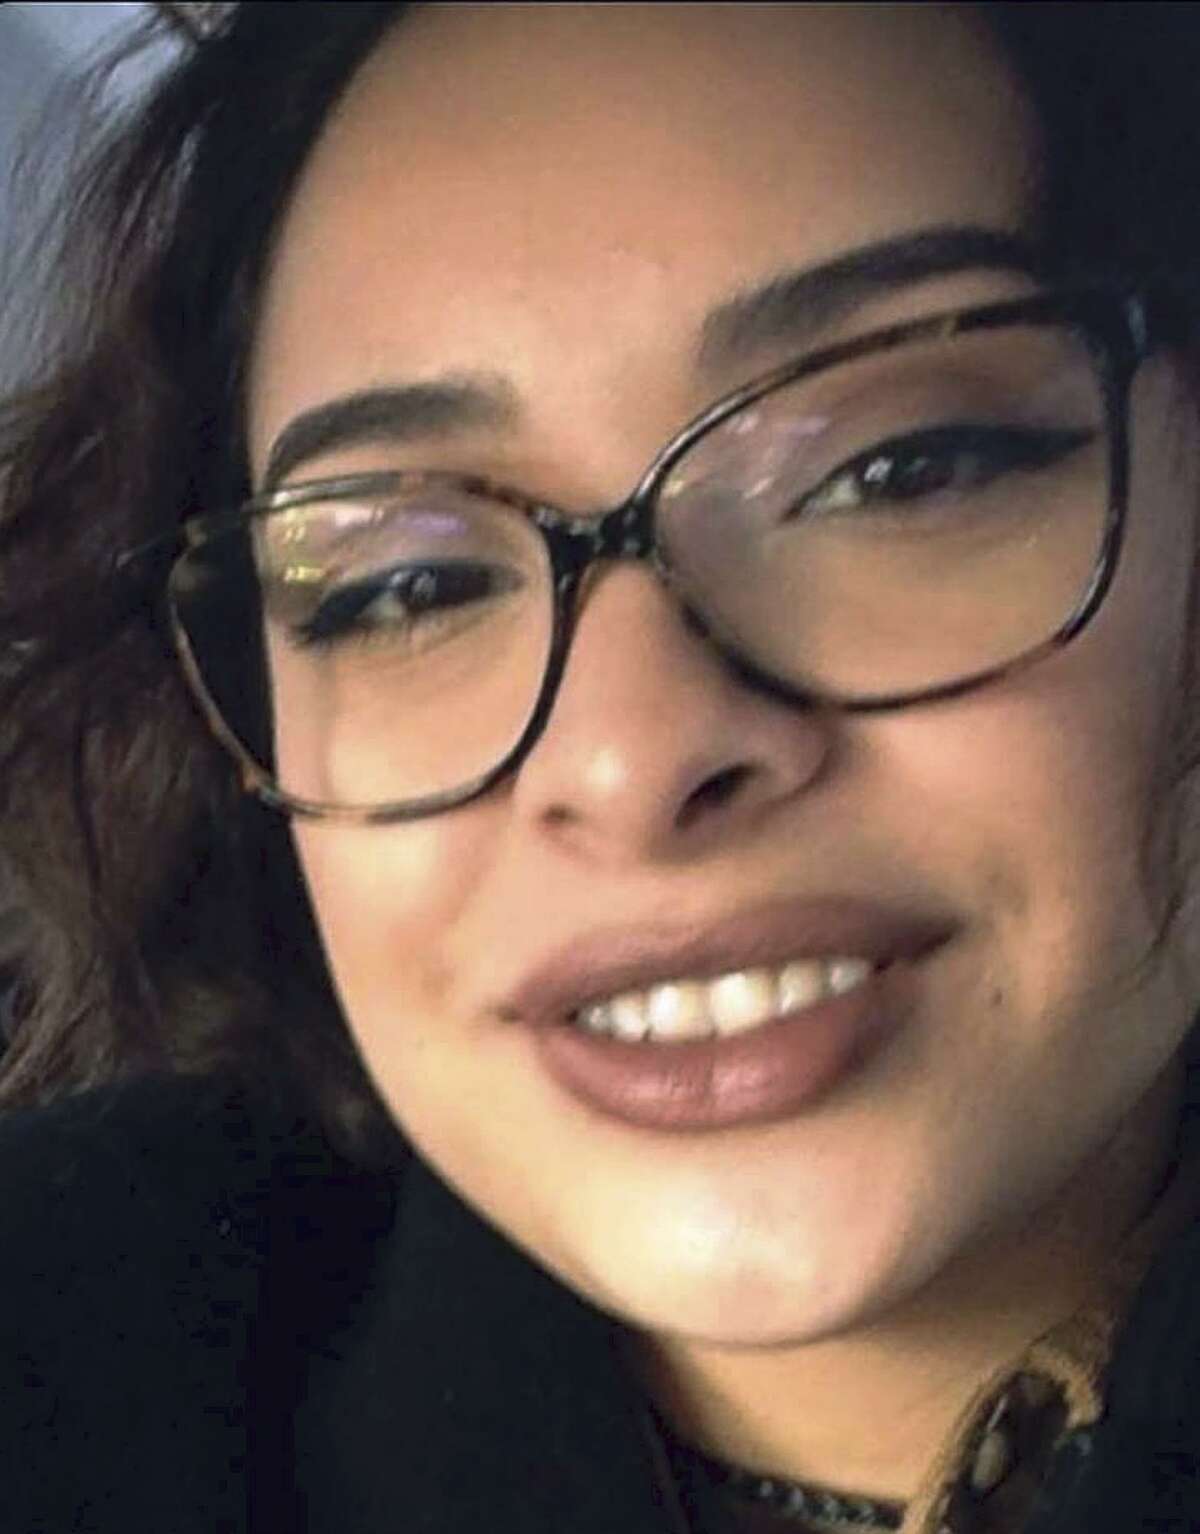 This undated photo provided by her family via the Greenwich Police Department shows Valerie Reyes, whose body was found inside a suitcase by highway workers on Tuesday, Feb. 6, 2019, in Greenwich, Conn.